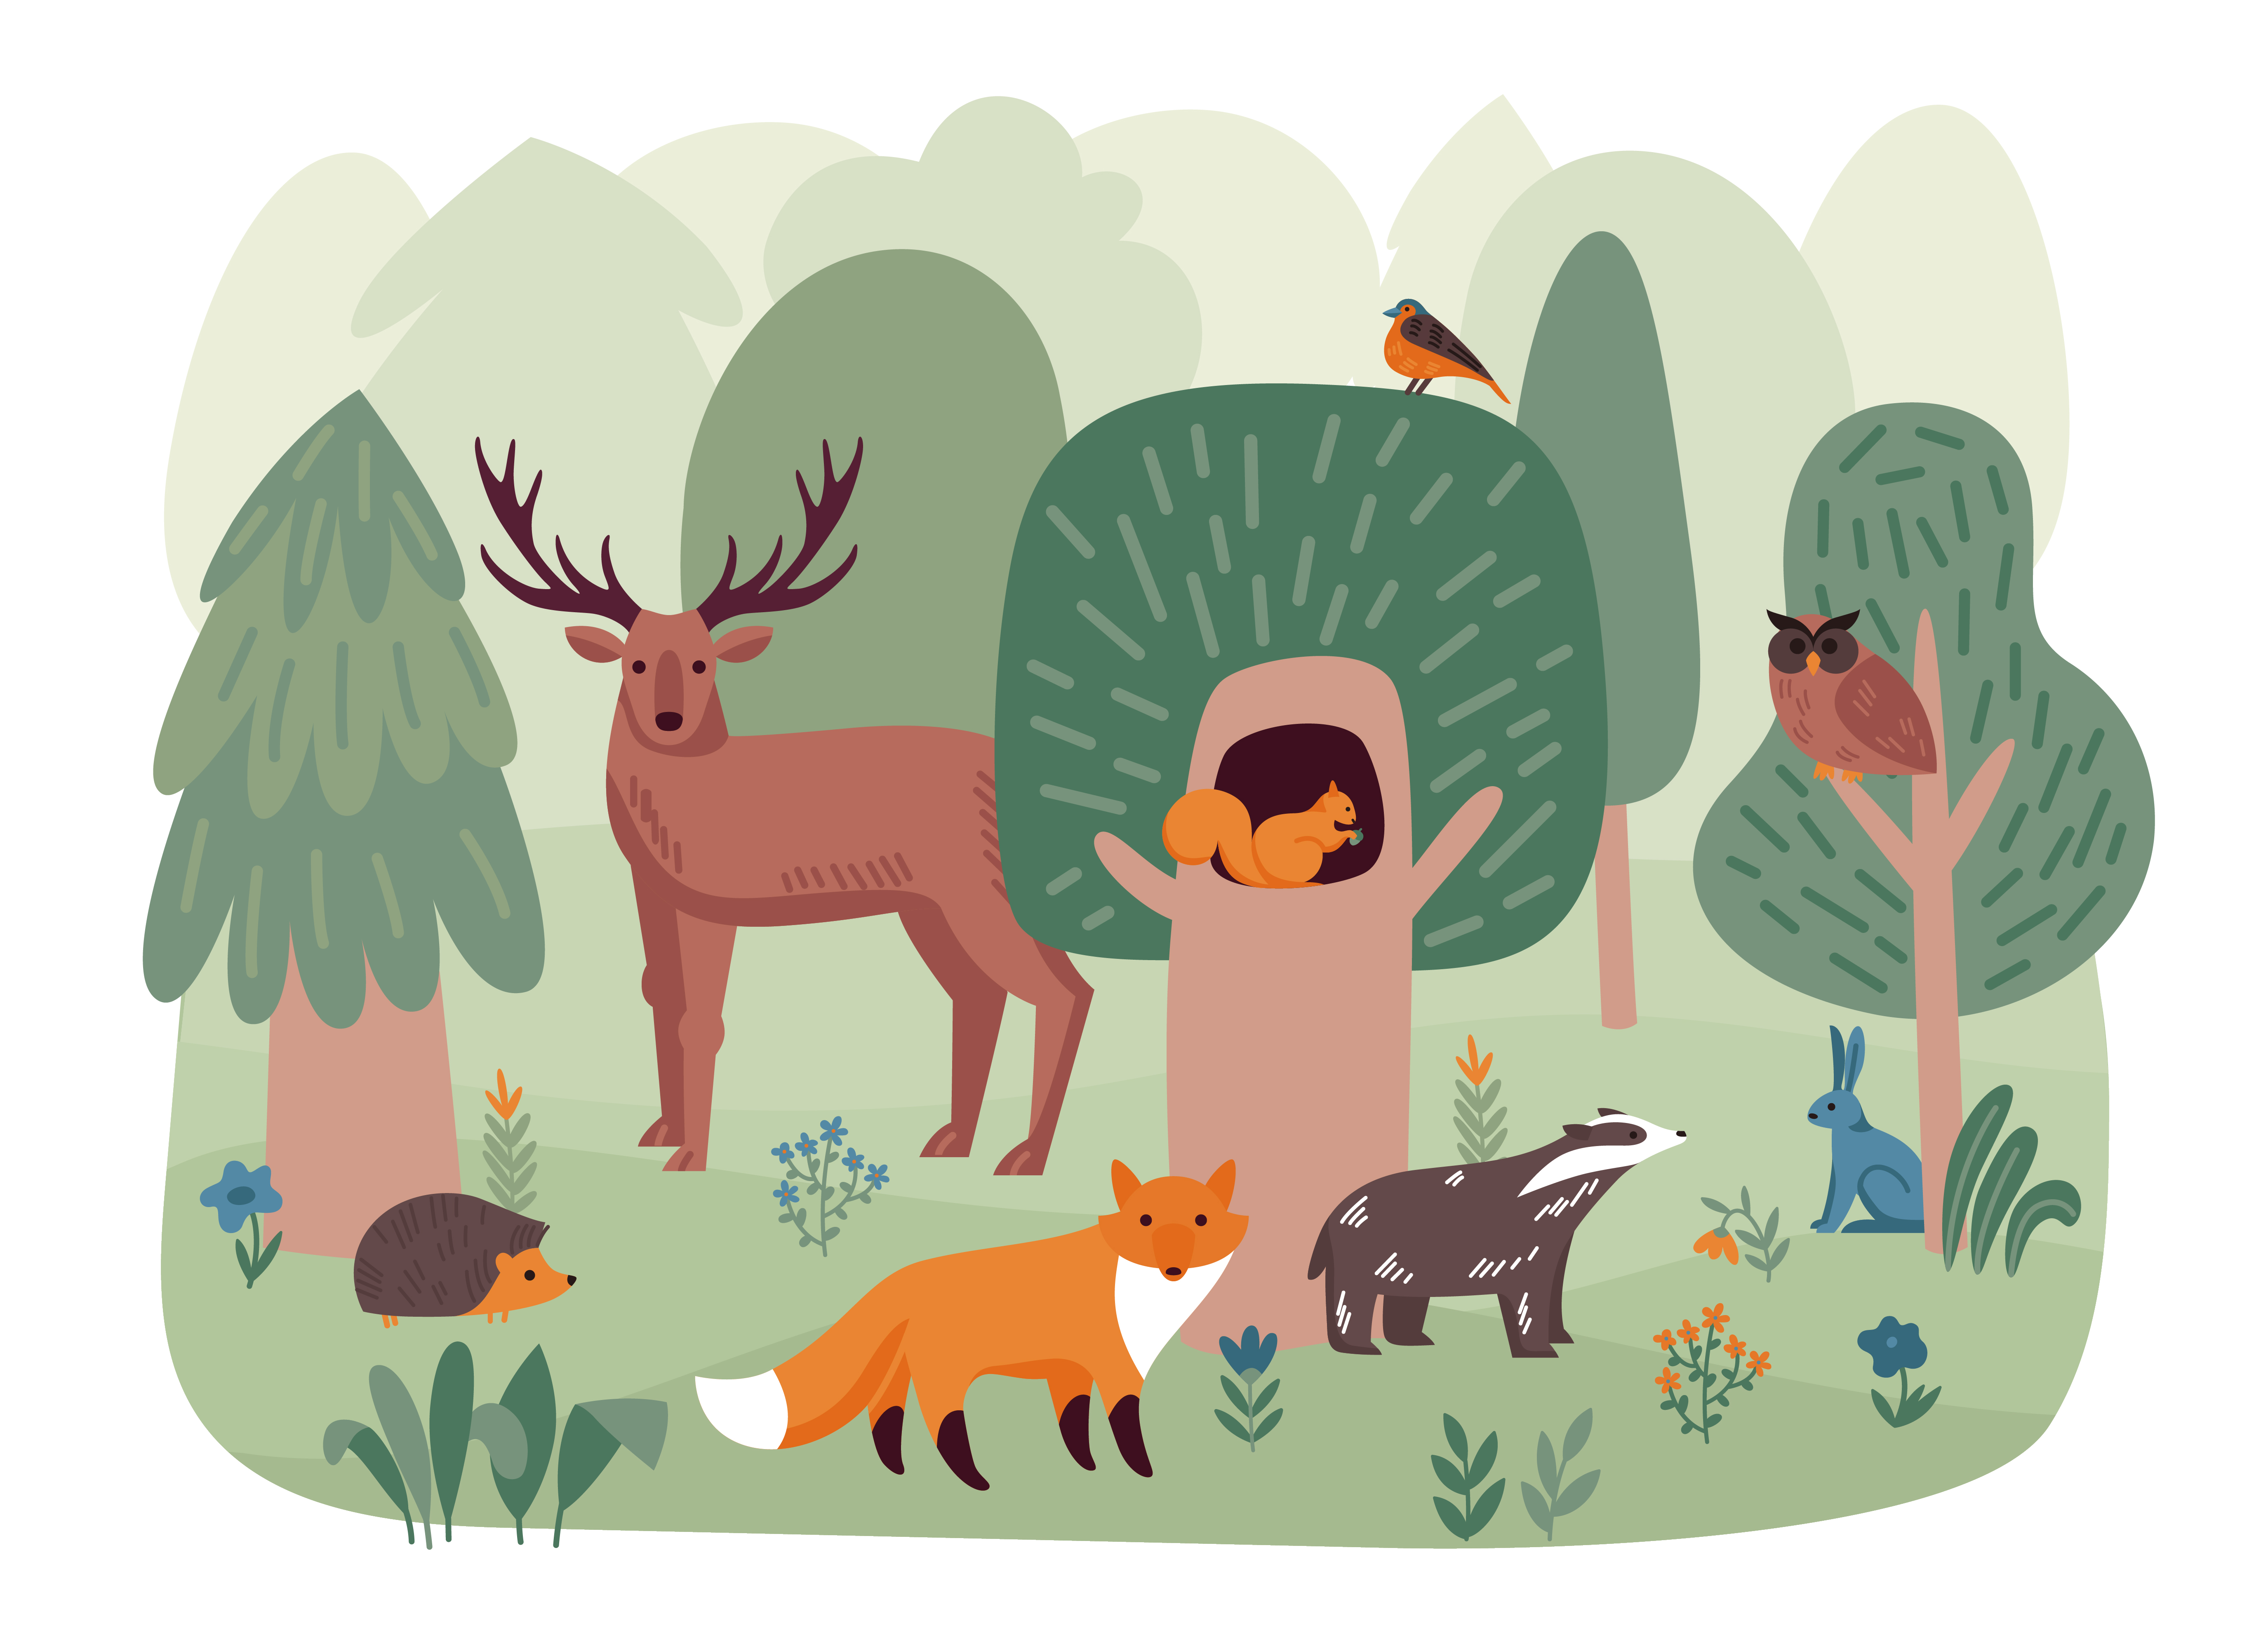 Illustration of several forest animals in a woodland setting